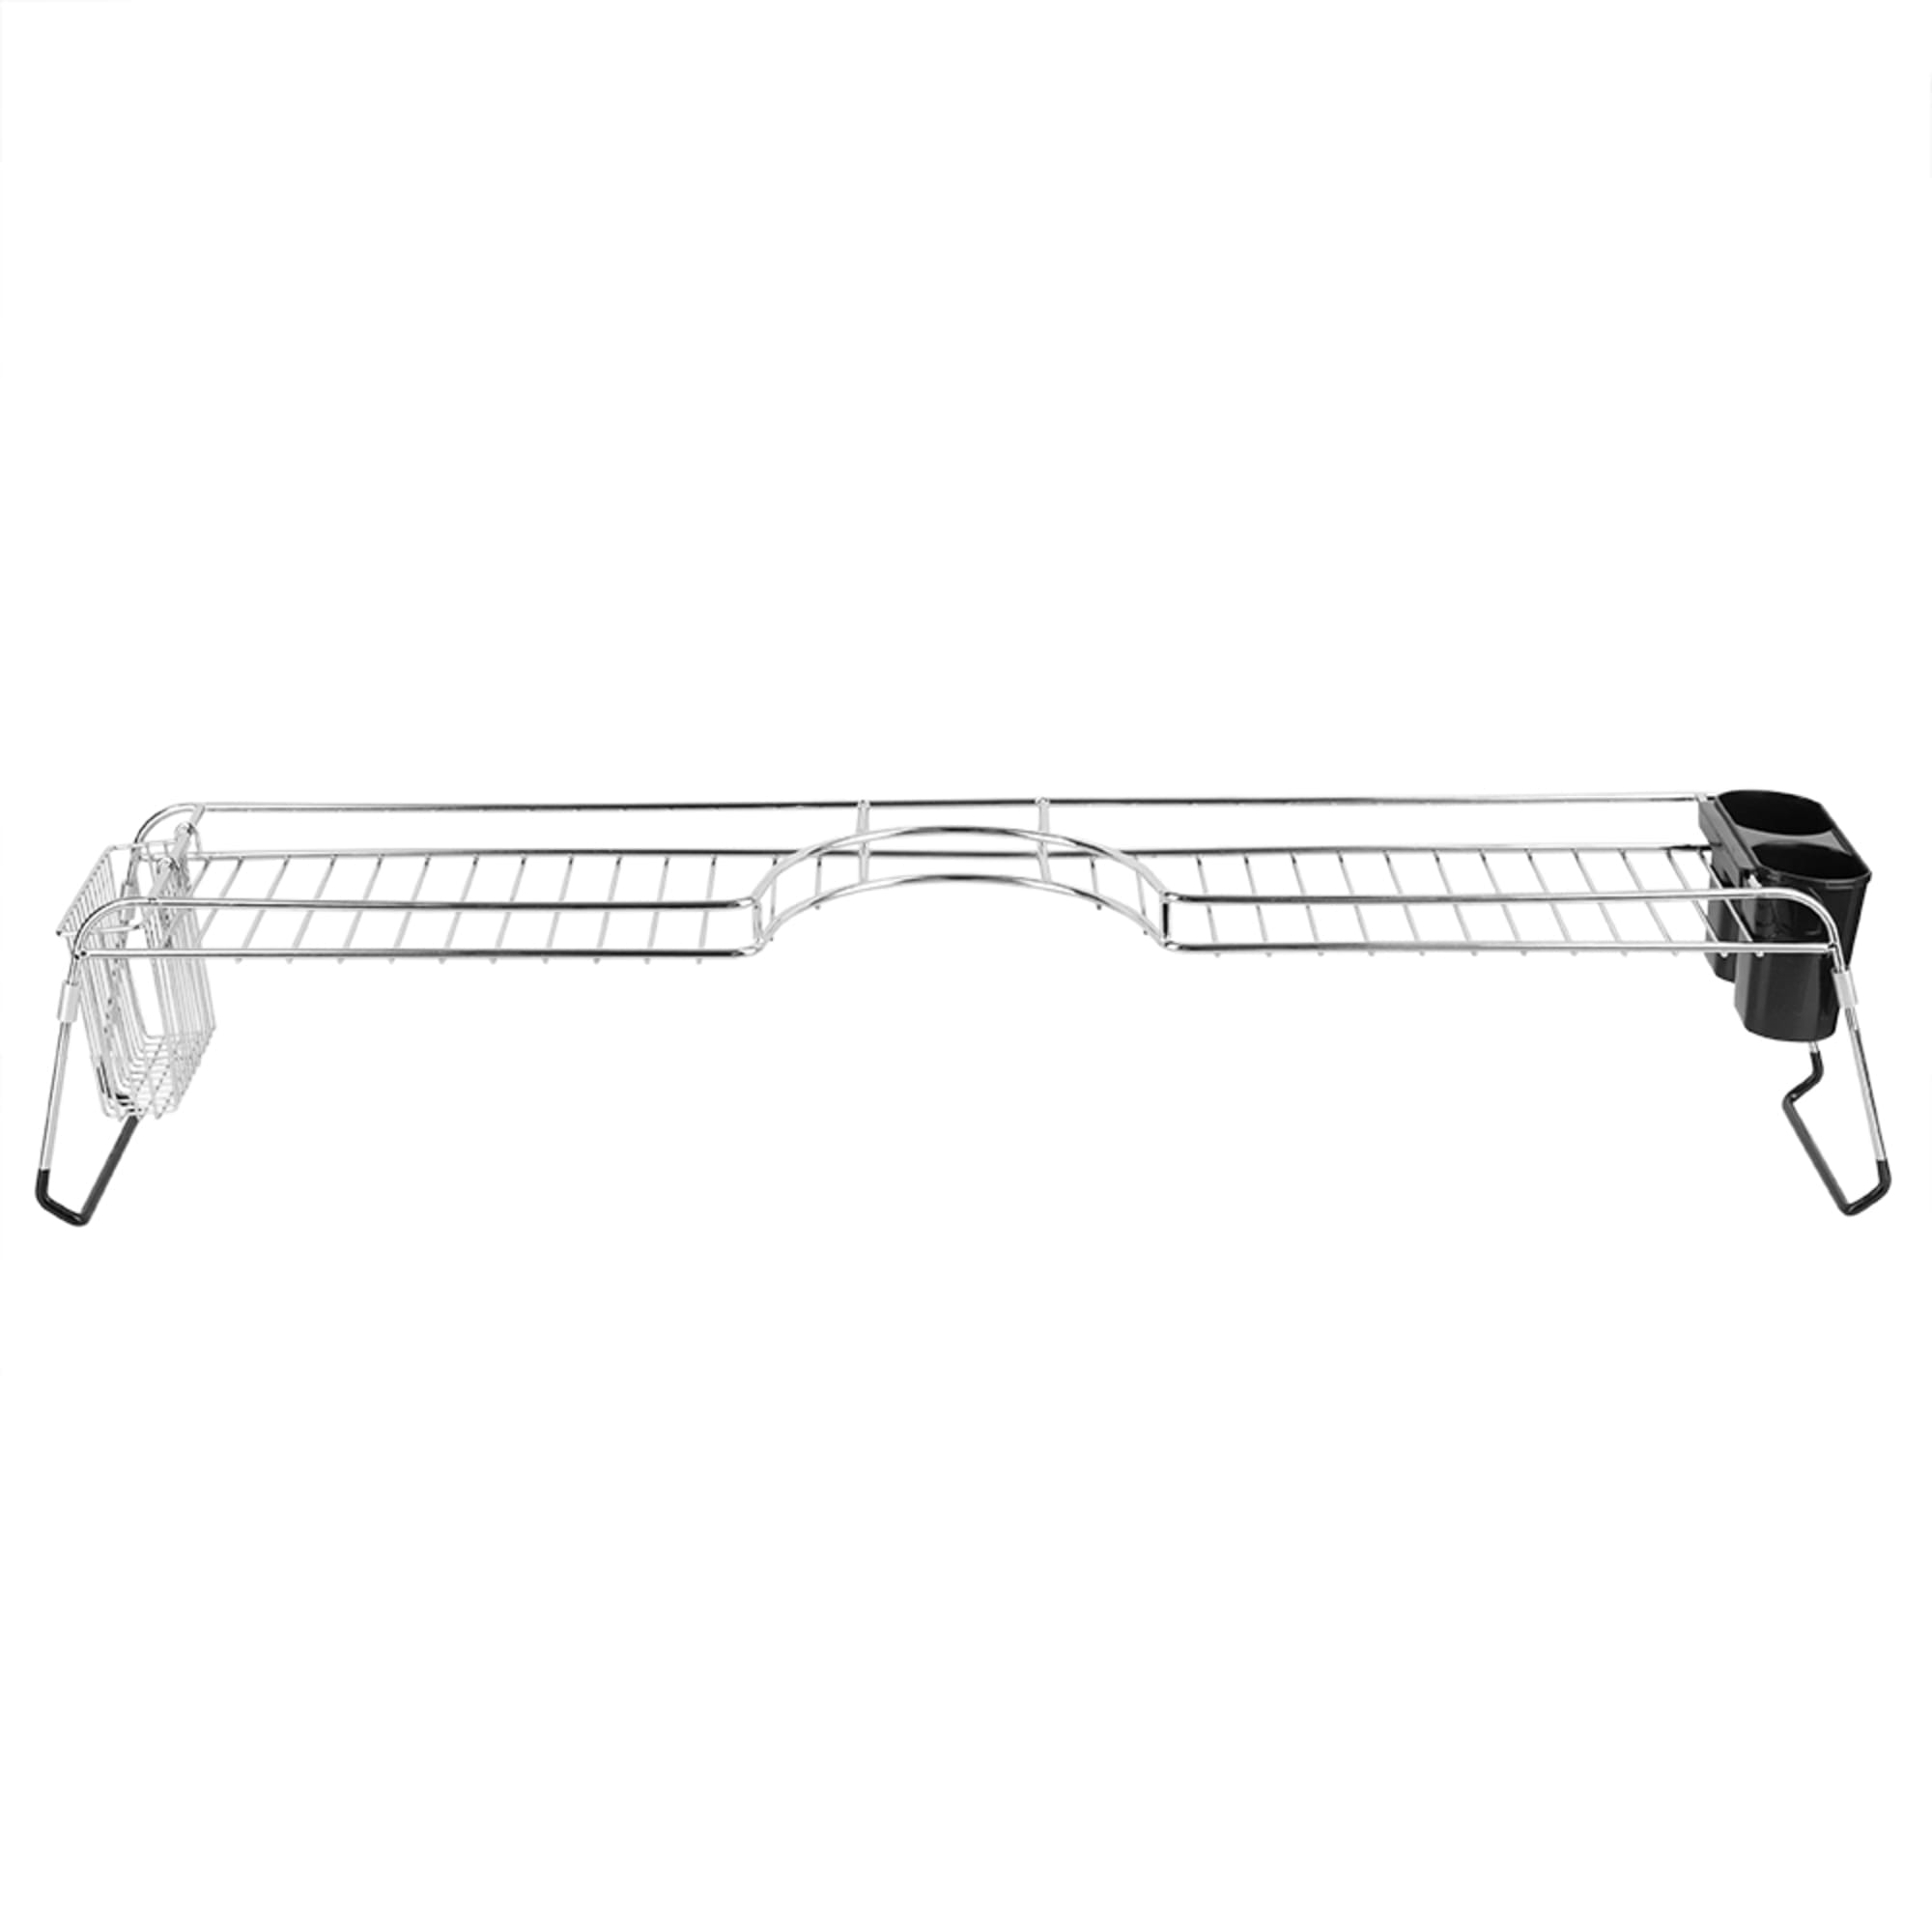 Home Basics Chrome Plated Steel Faucet Spacer Over the Sink Shelf with Cutlery Holder $25.00 EACH, CASE PACK OF 6